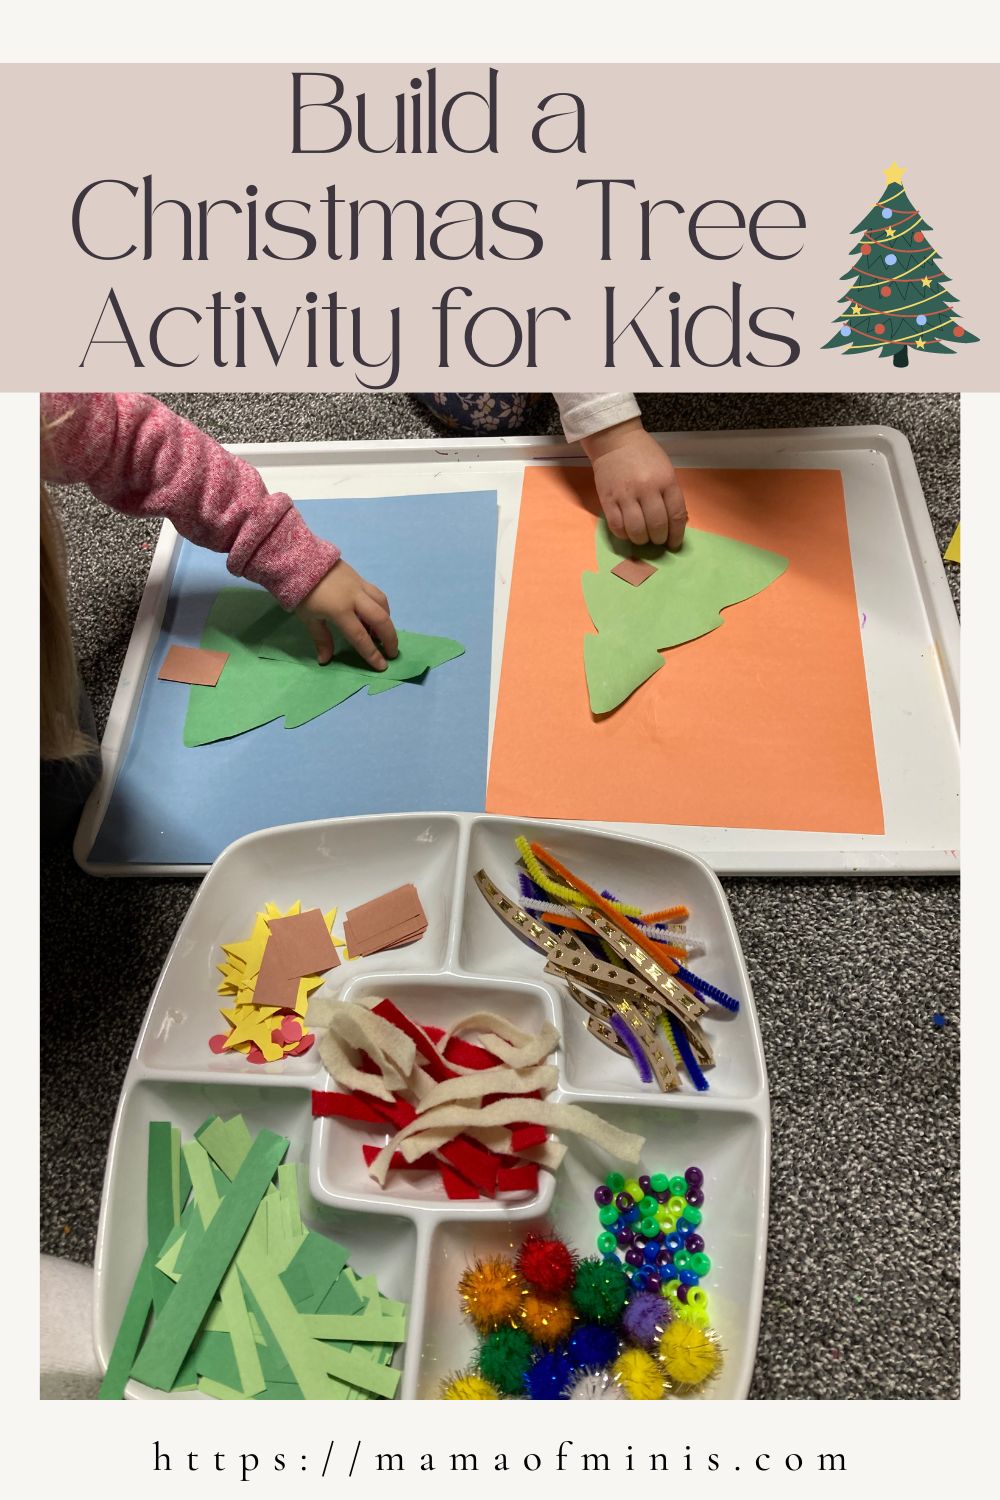 Build a Christmas Tree Activity for Kids Craft